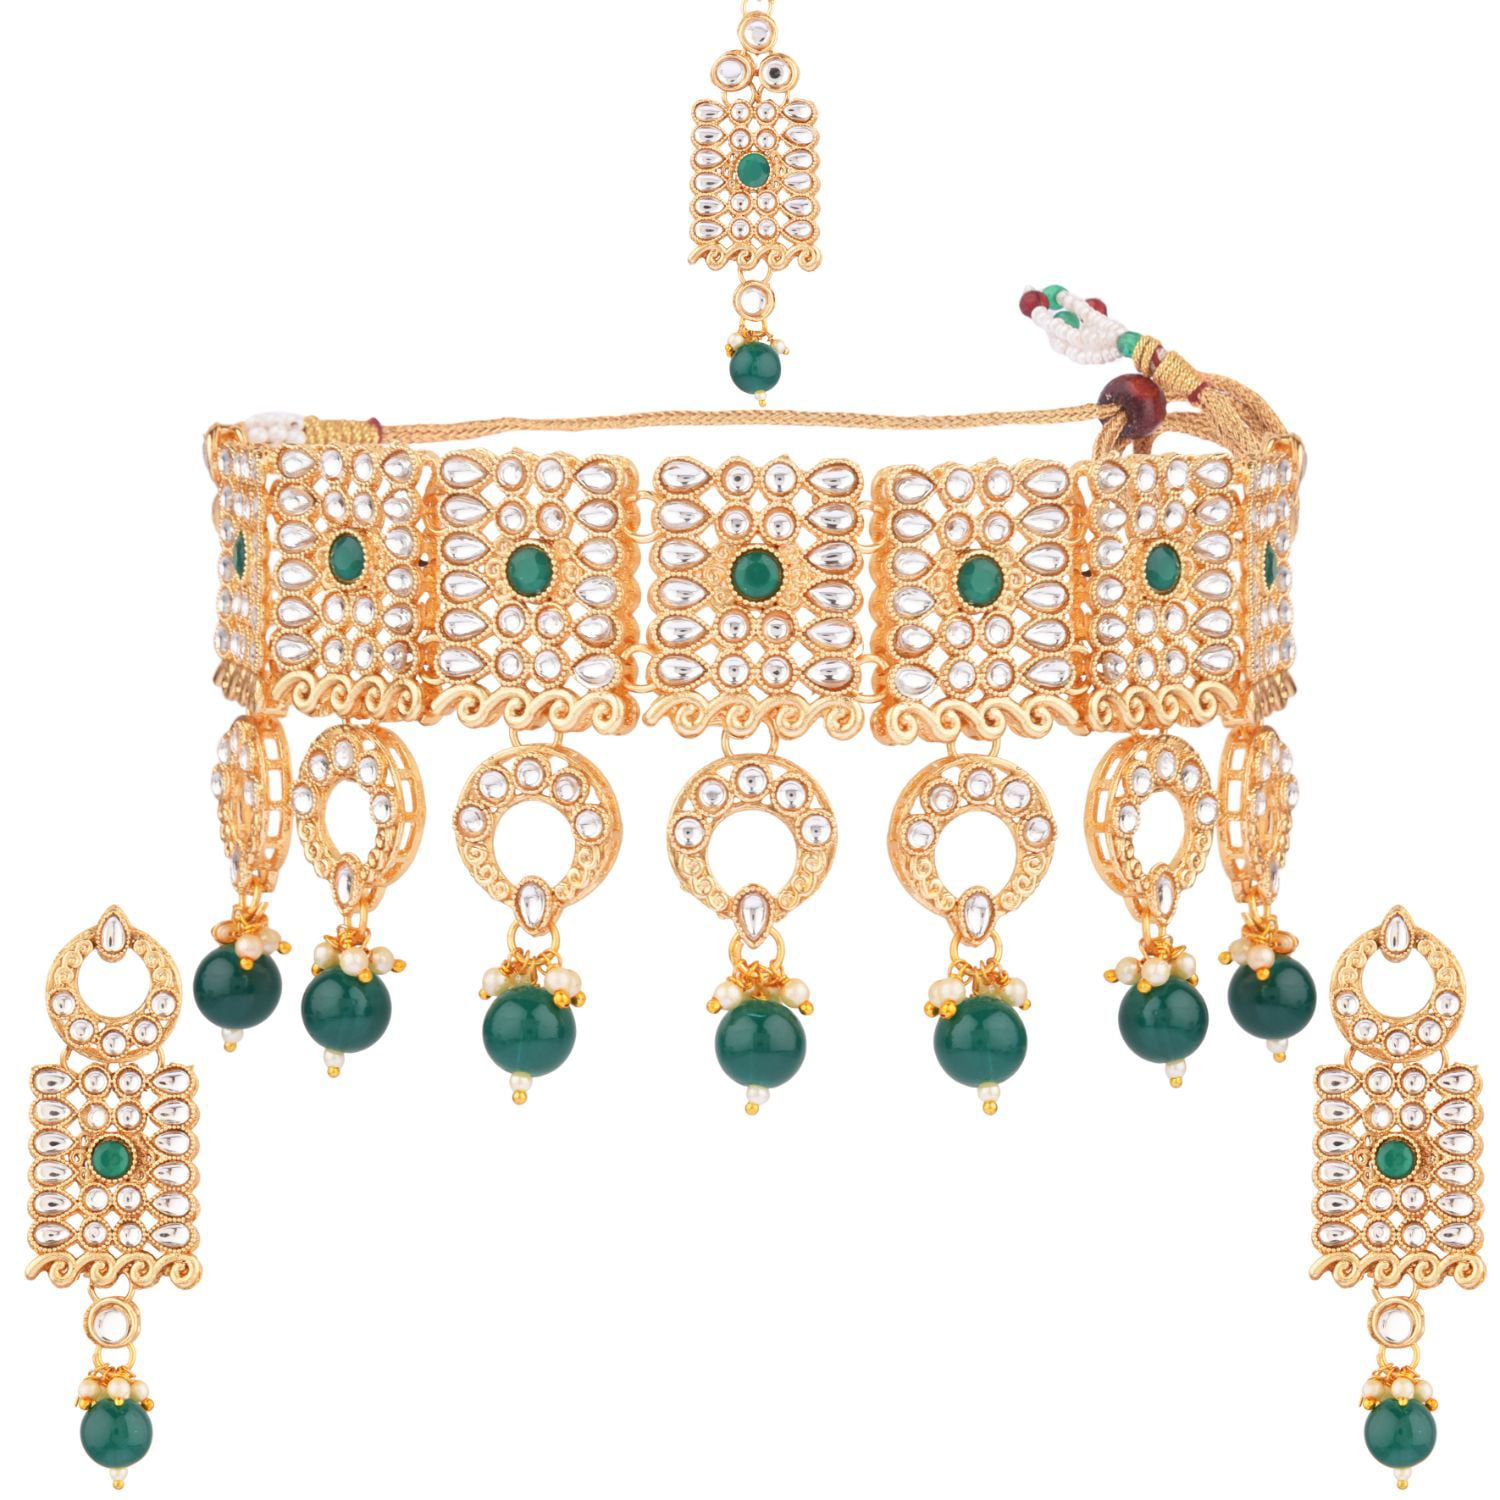 Details about   ETHNIC INDIAN LONG HAR JEWELRY GOLDTONE BRIDAL PEARL CZ NECKLACE EARRINGS SET 